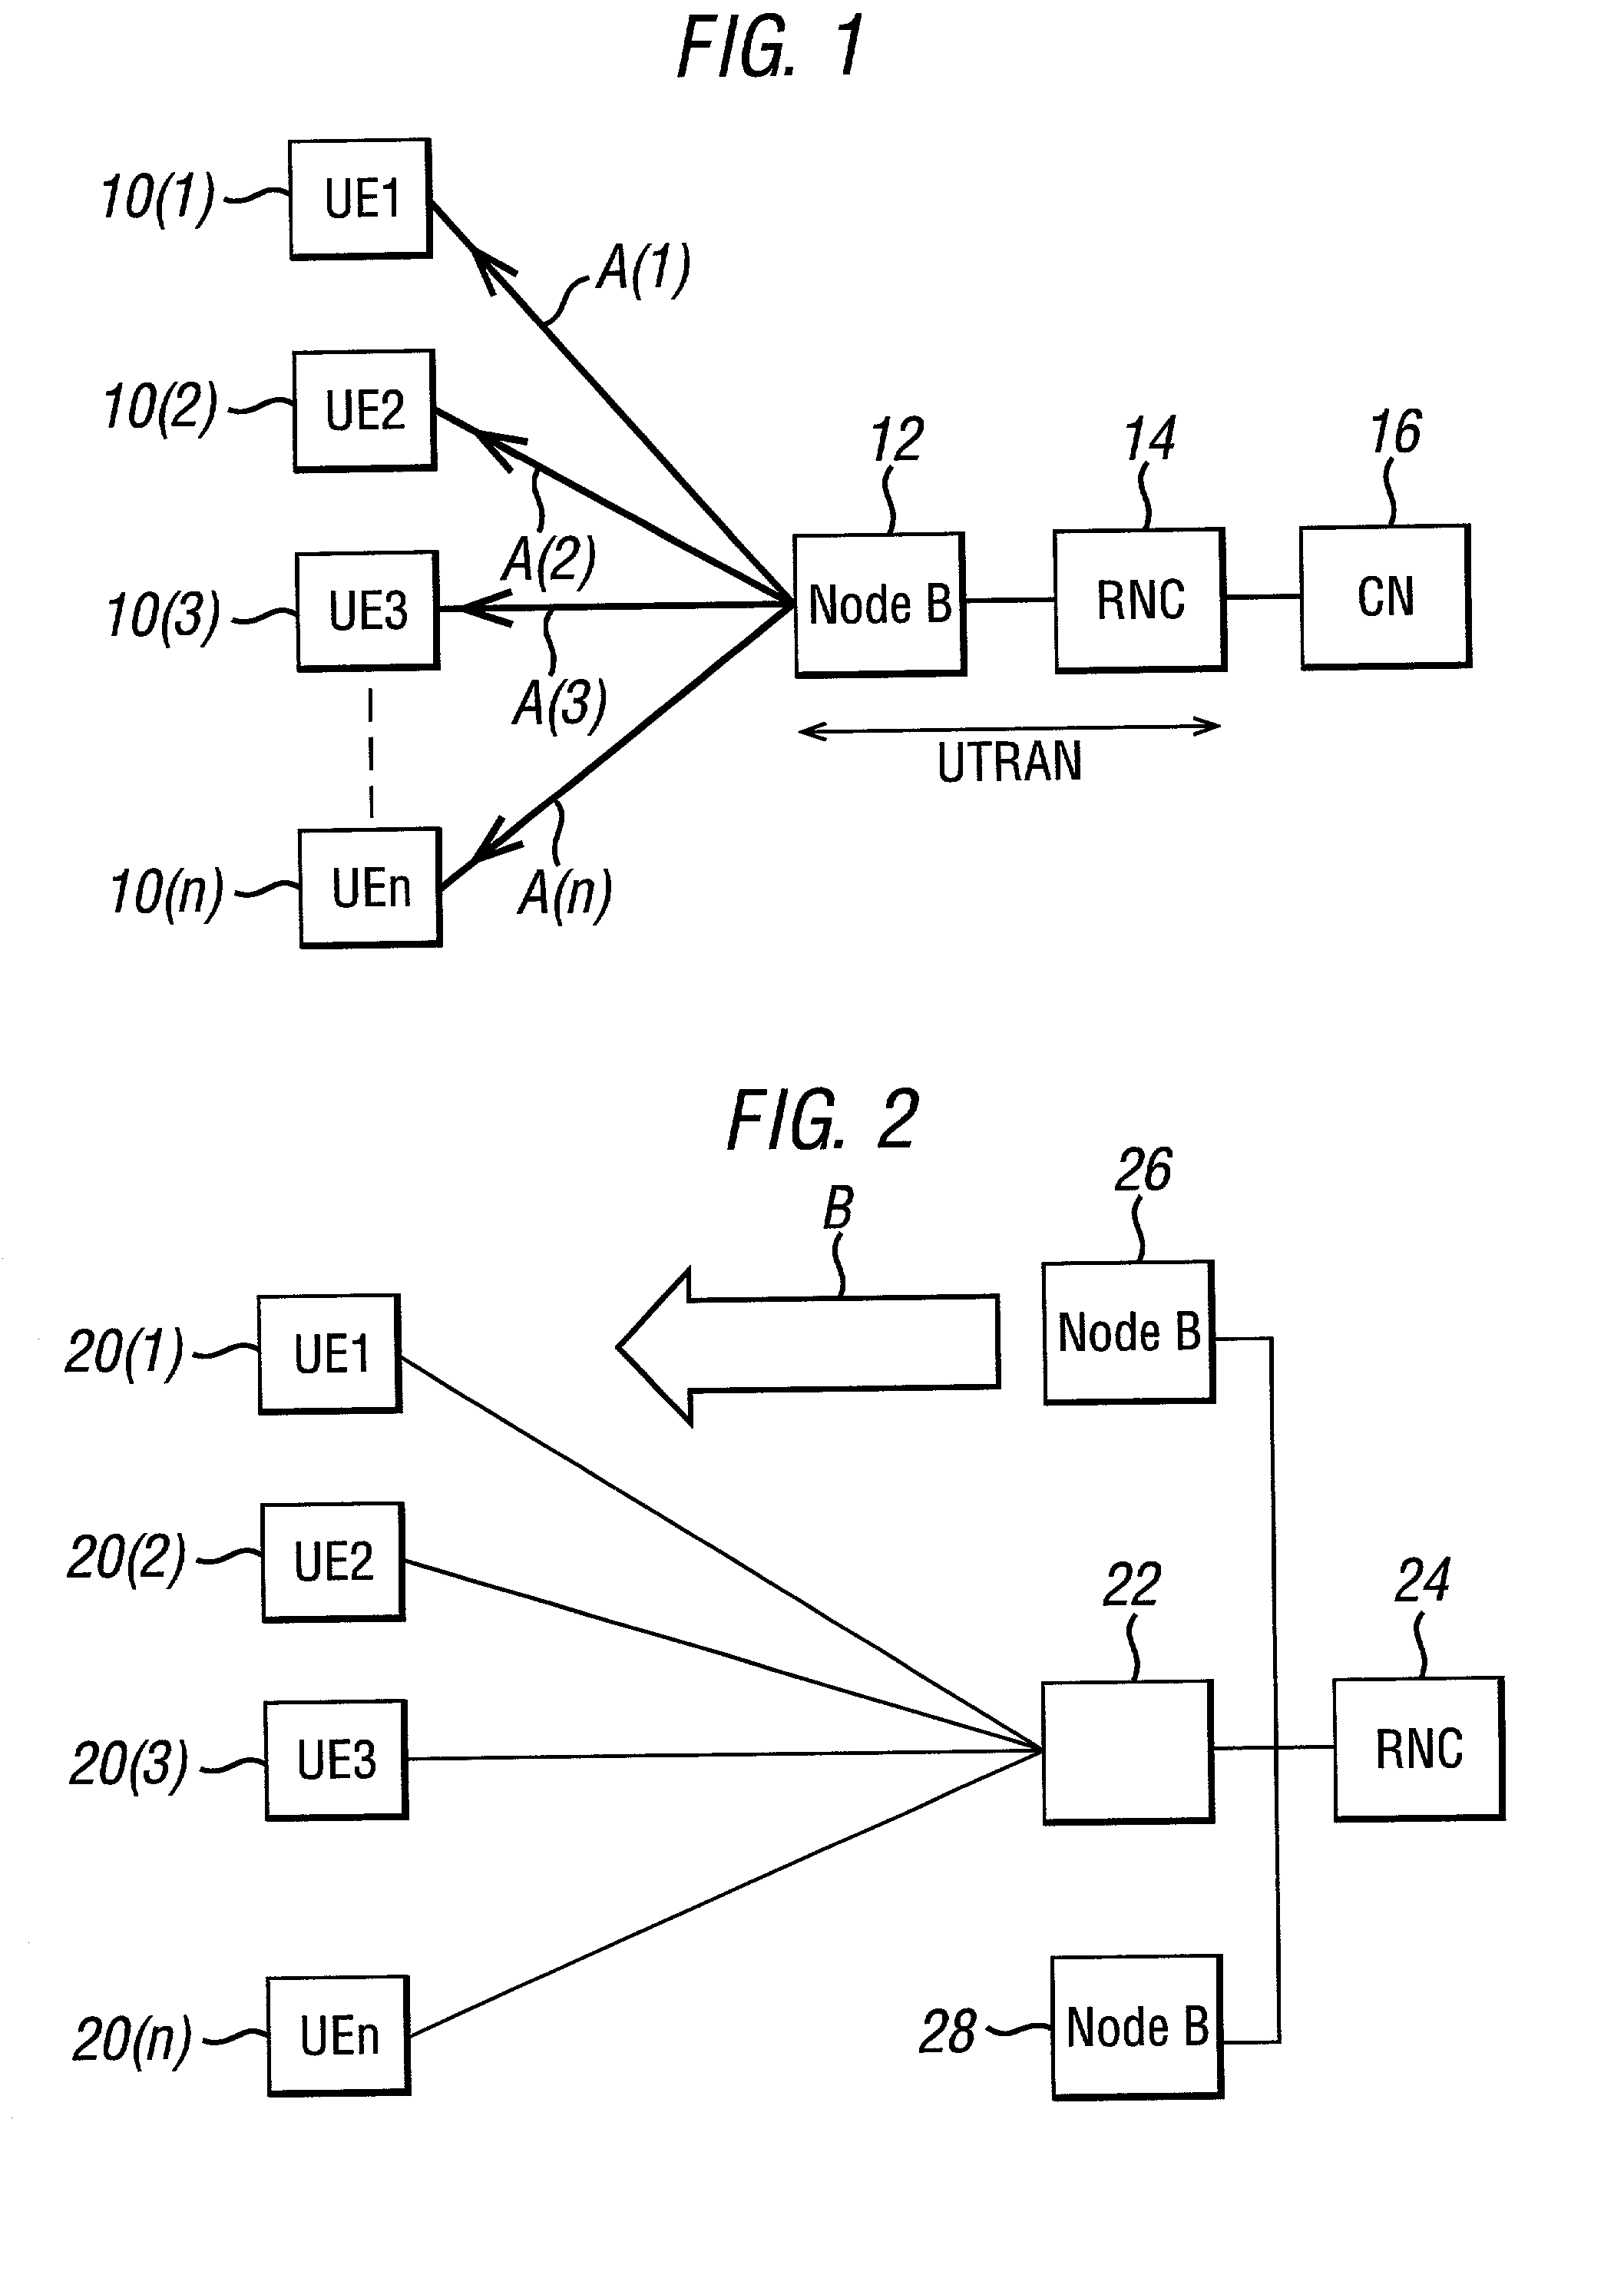 Method and apparatus for reducing signalling load in mobile telecommunications networks